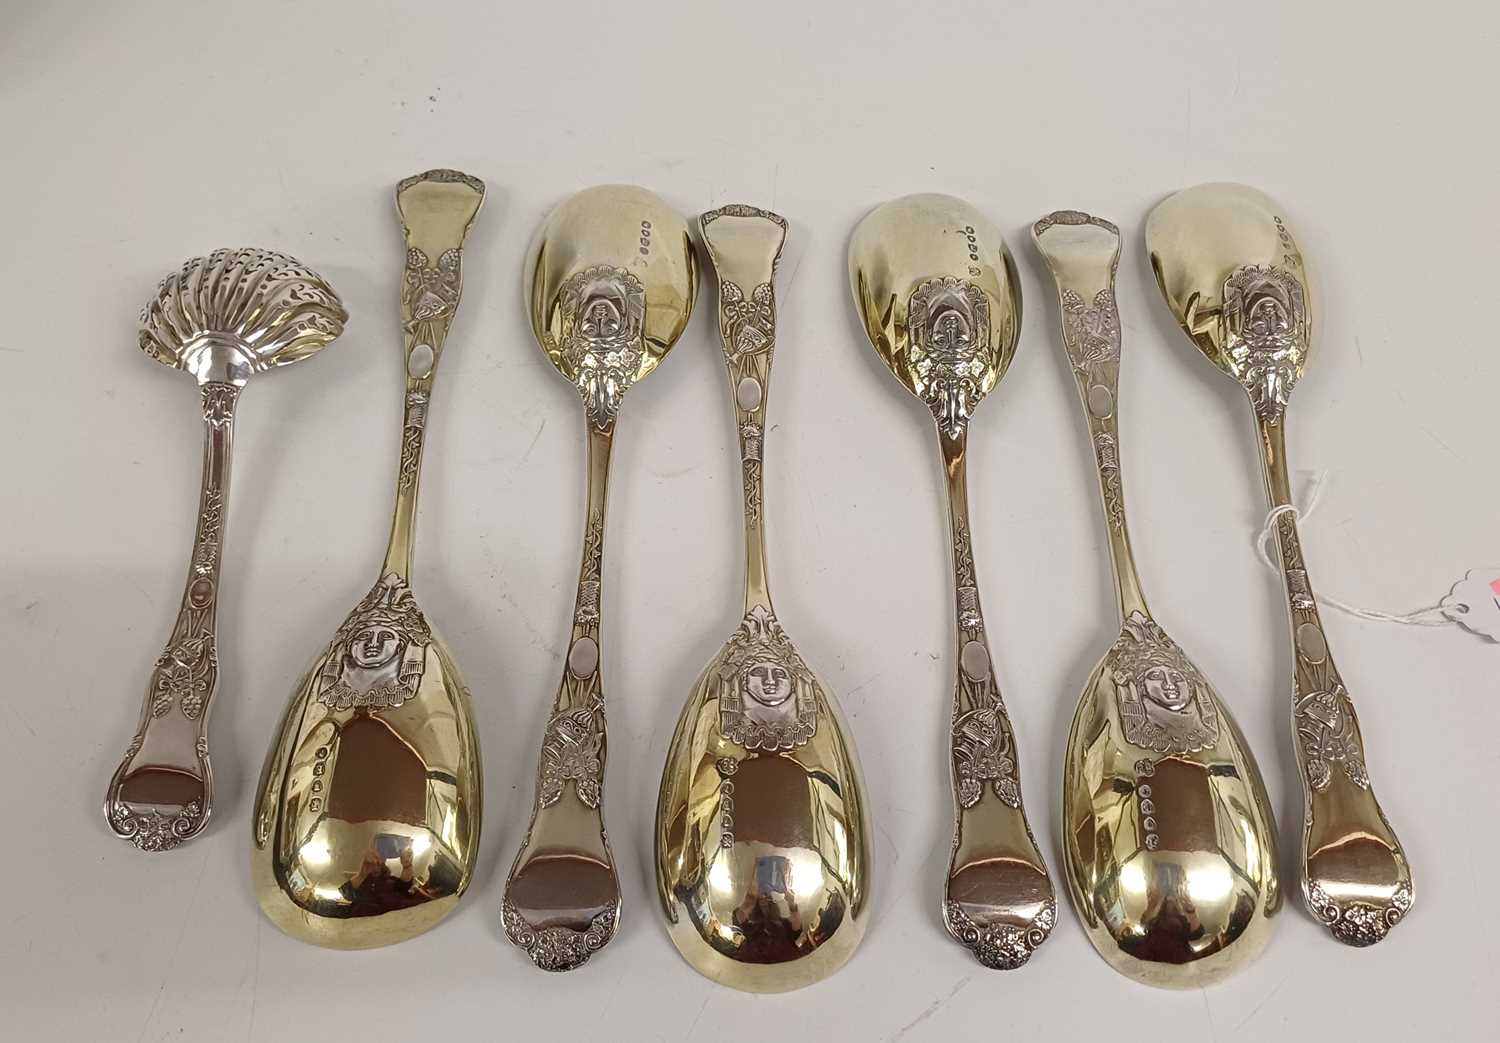 A Cased Set of Six Victorian Parcel-Gilt Silver Berry-Spoons and a Sifting Spoon, by Henry John Lia - Image 8 of 10